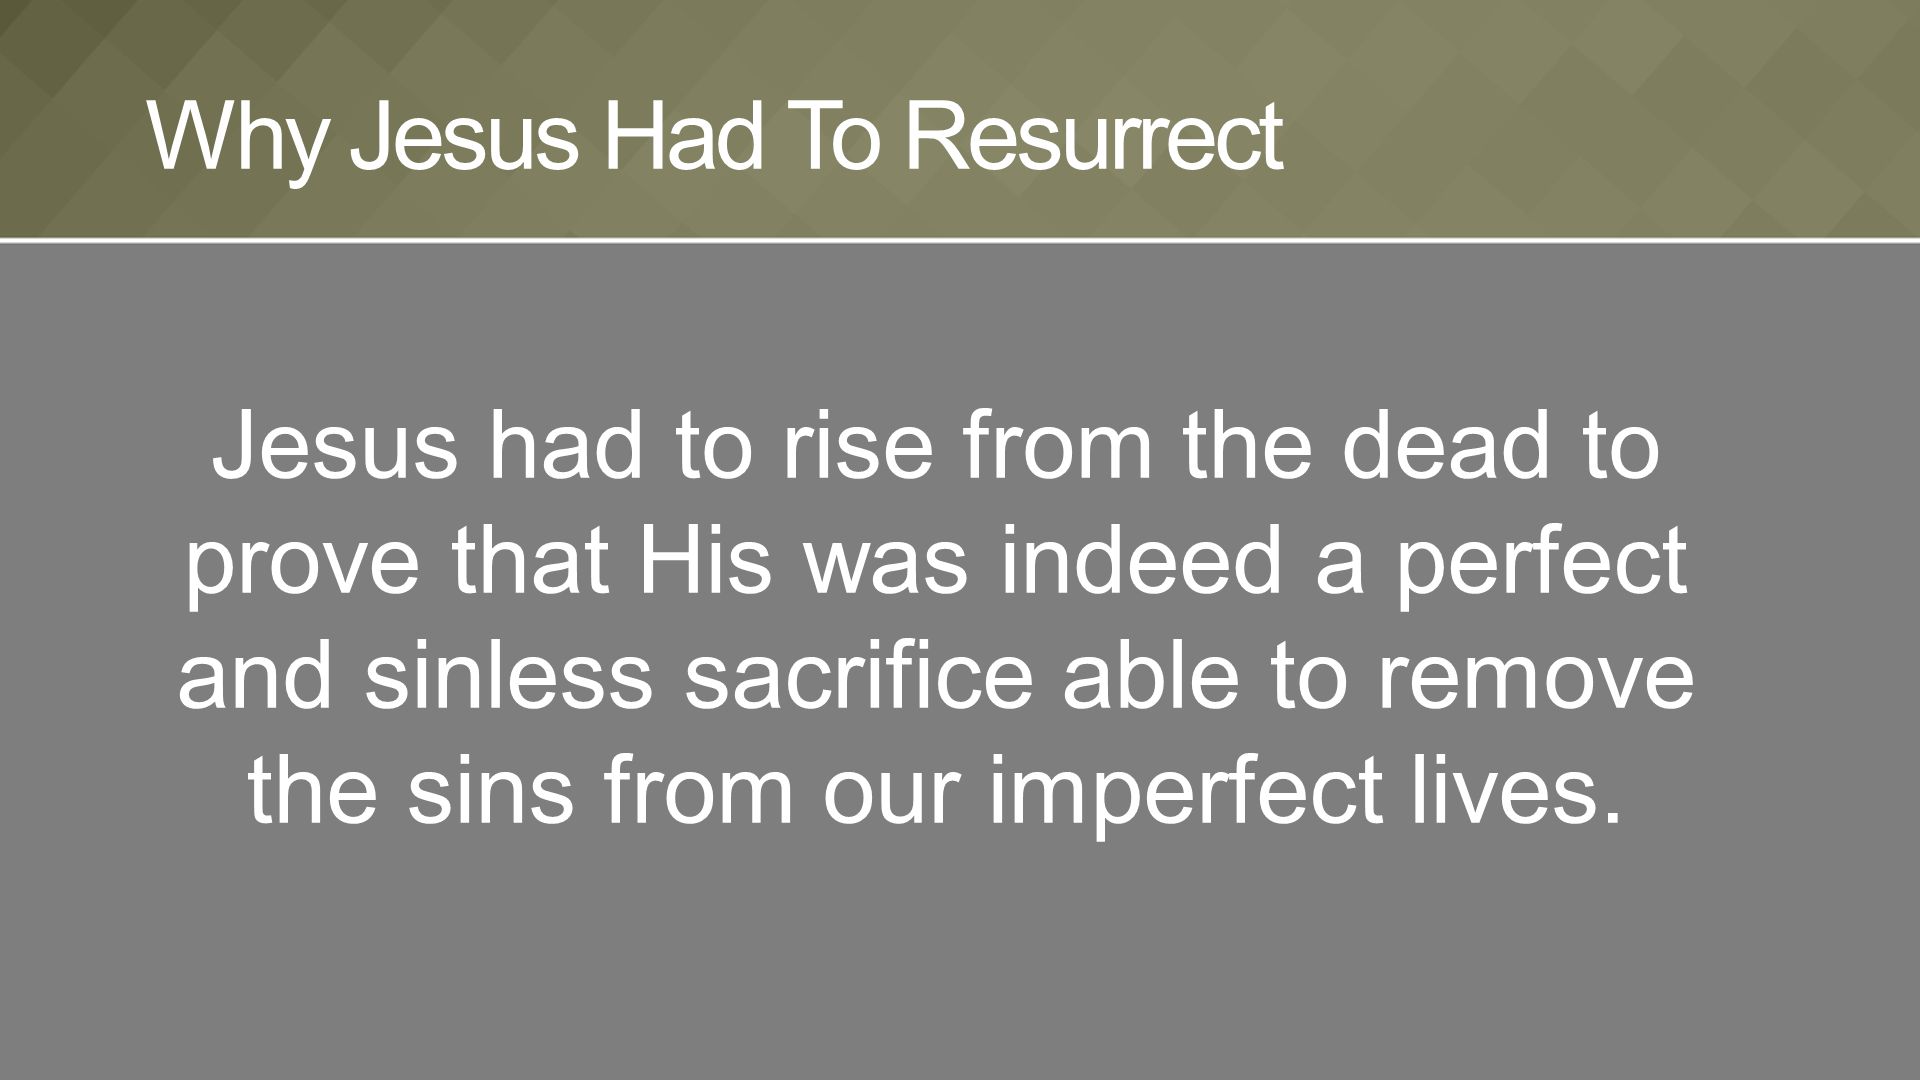 Jesus had to rise from the dead to prove that His was indeed a perfect and sinless sacrifice able to remove the sins from our imperfect lives.